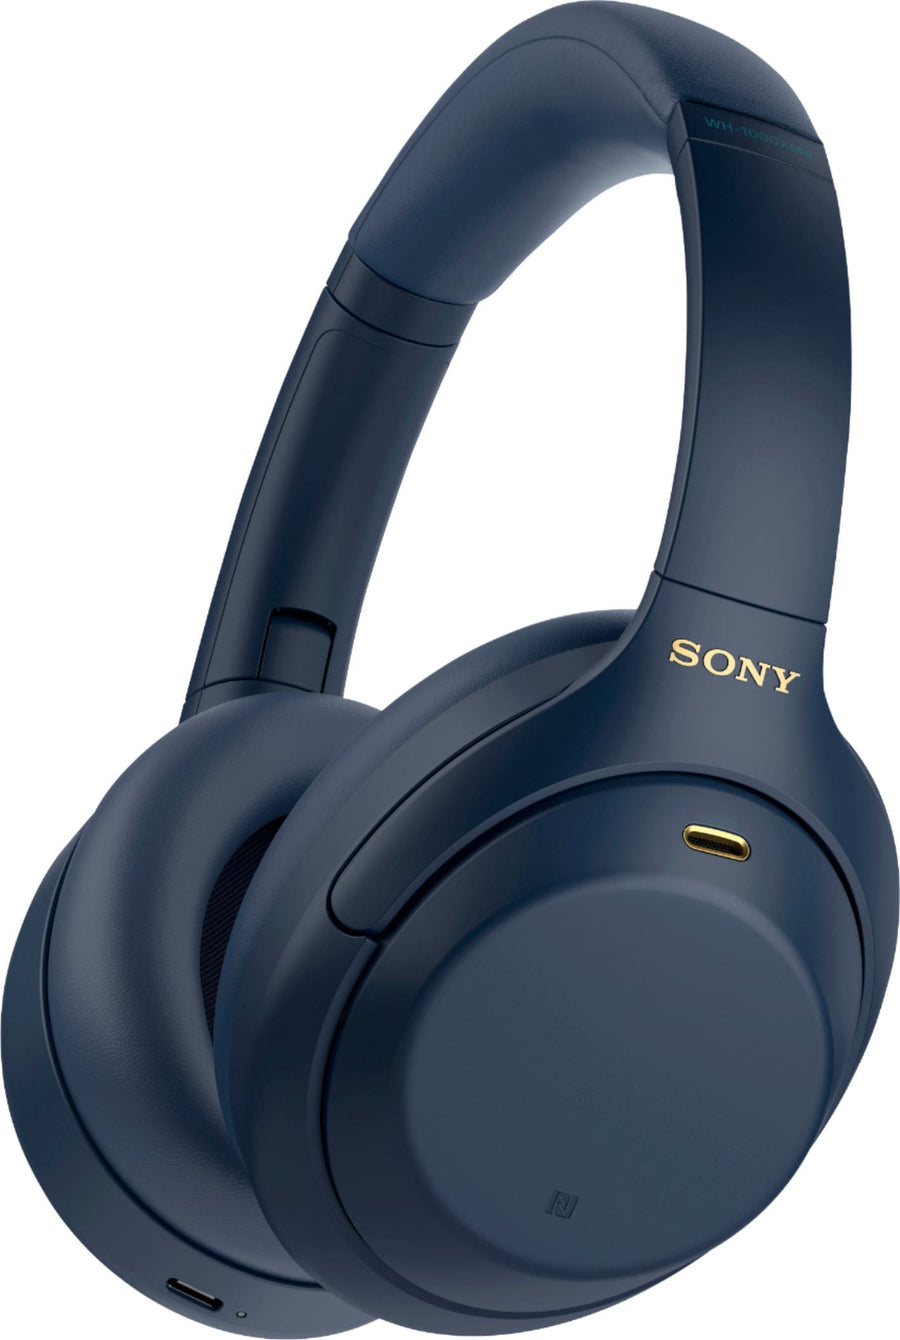 Sony - WH-1000XM4 Wireless Noise-Cancelling Over-the-Ear Headphones - Midnight Blue_0